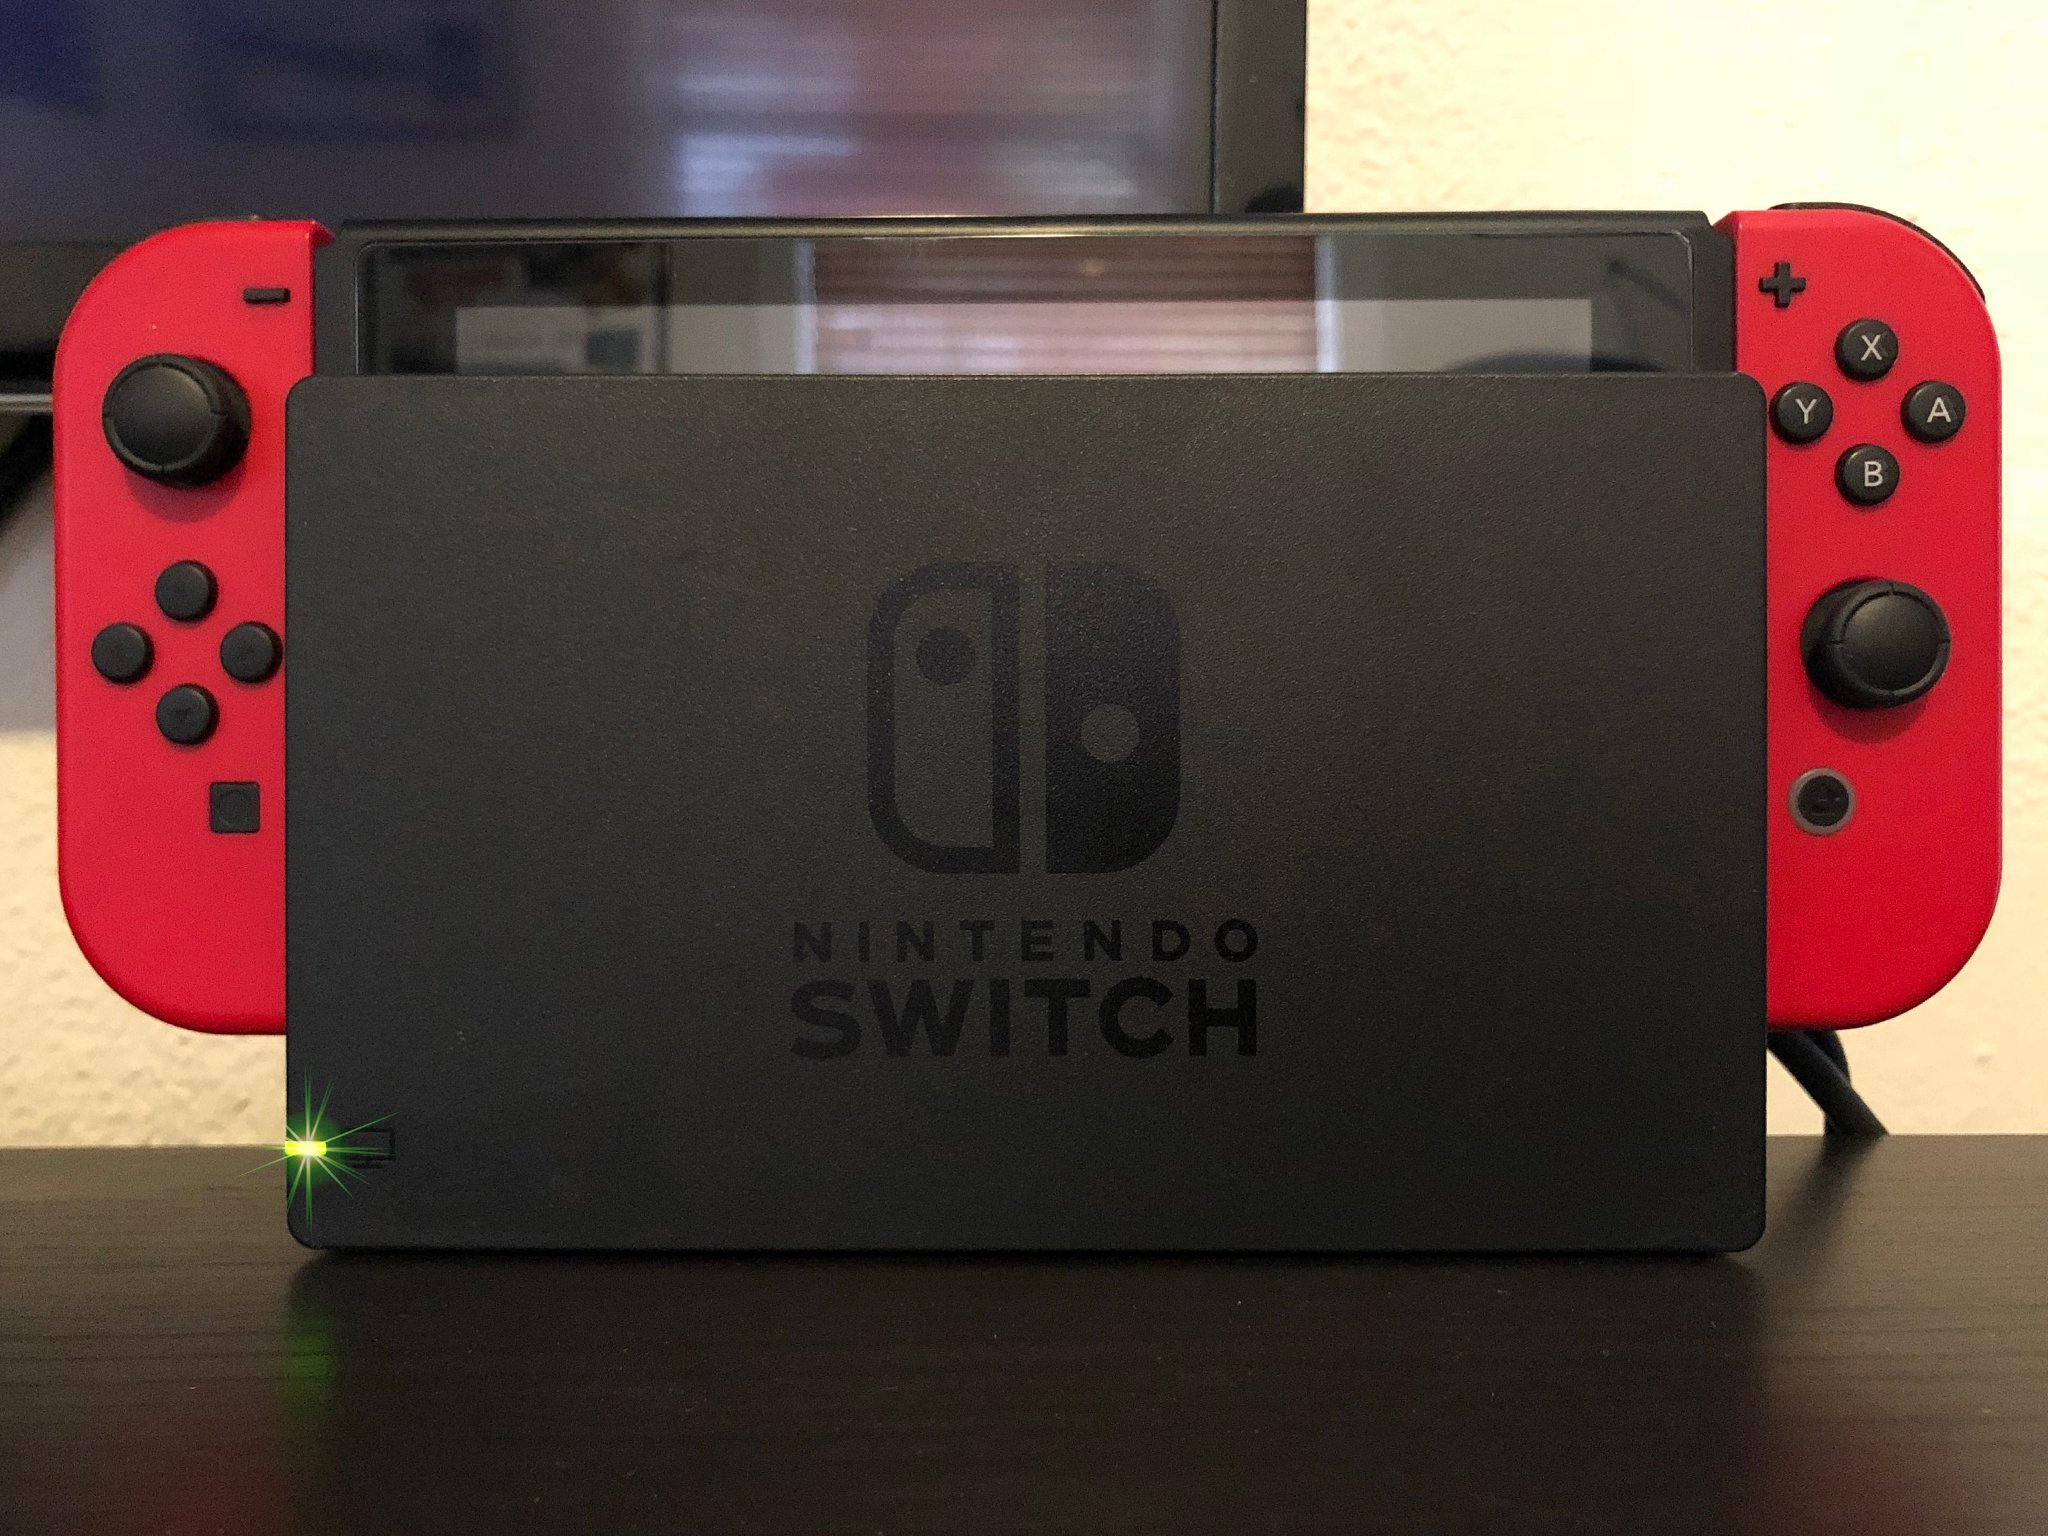 How to fix blinking green light your Nintendo Switch dock | iMore